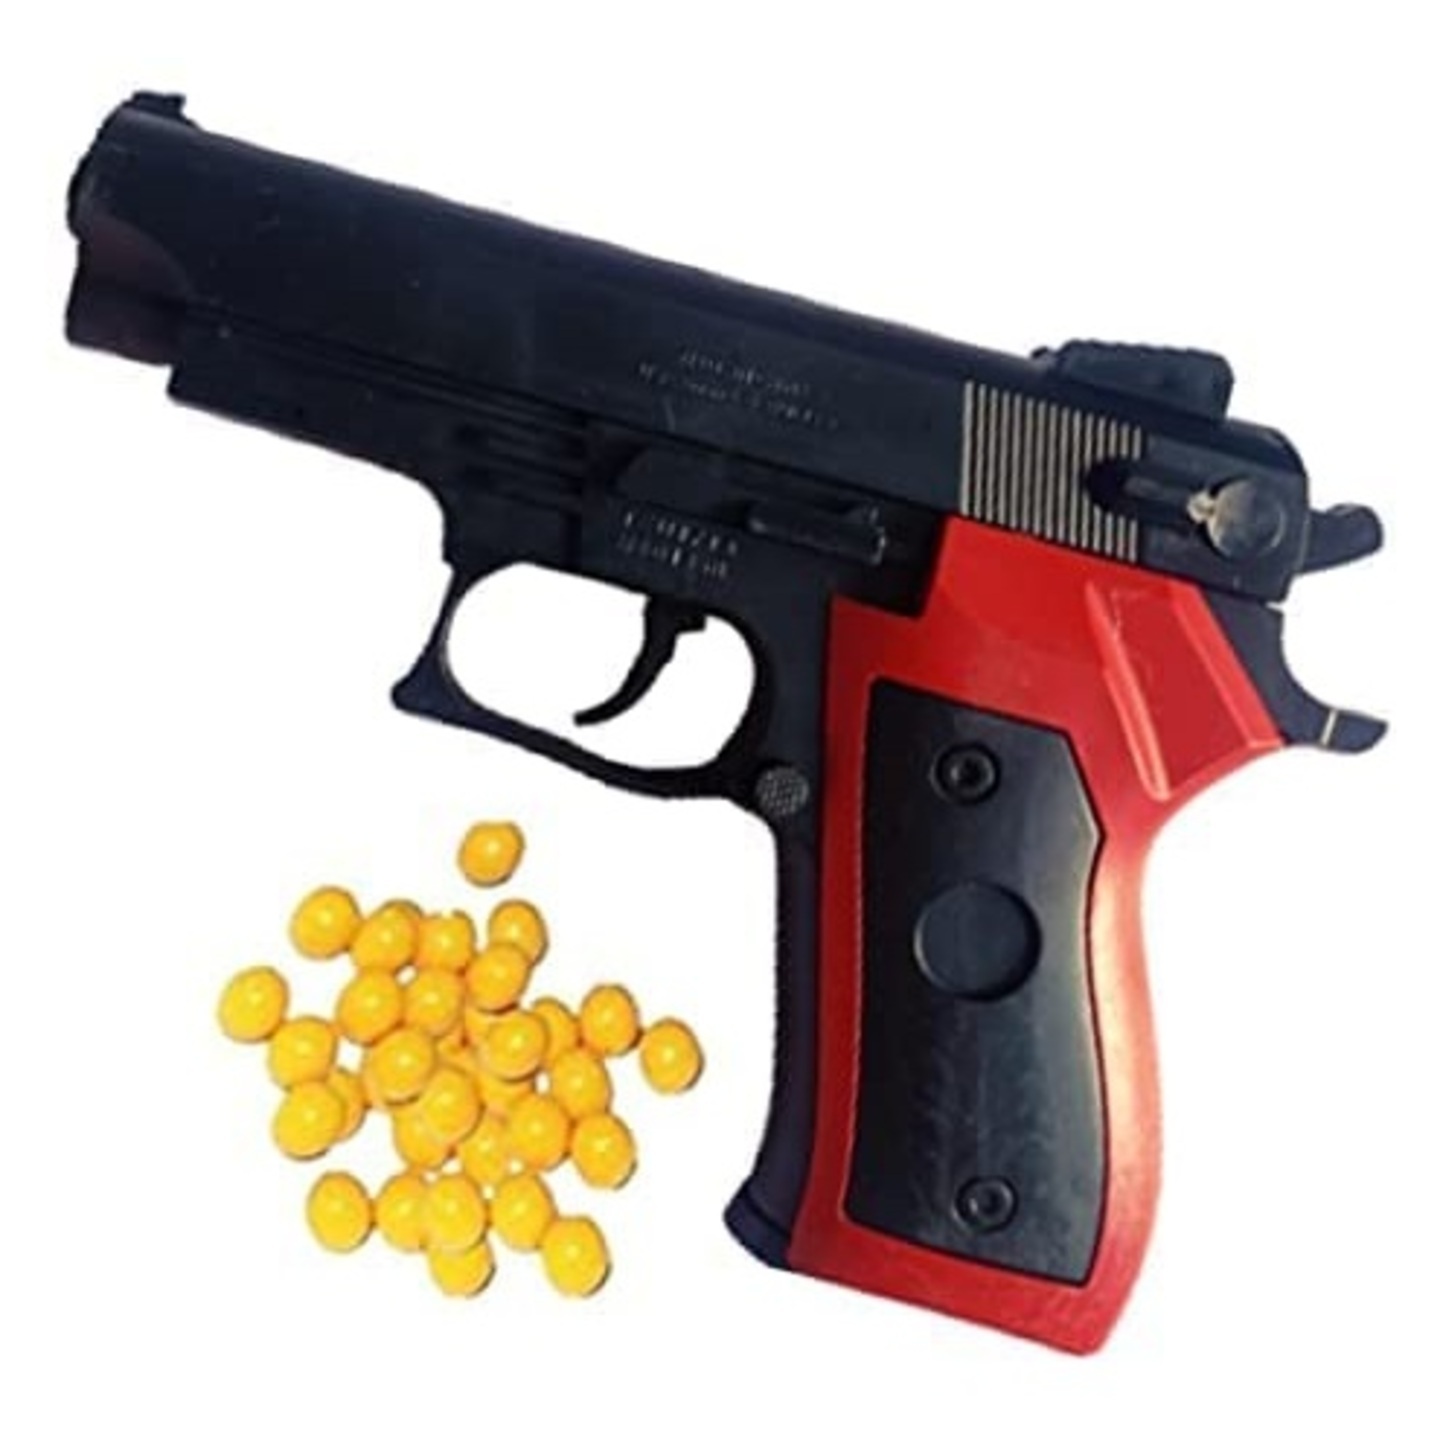 Toy Gun Pistol for kids with 8 Round Reload and 50 free BB Bullets 6 mm